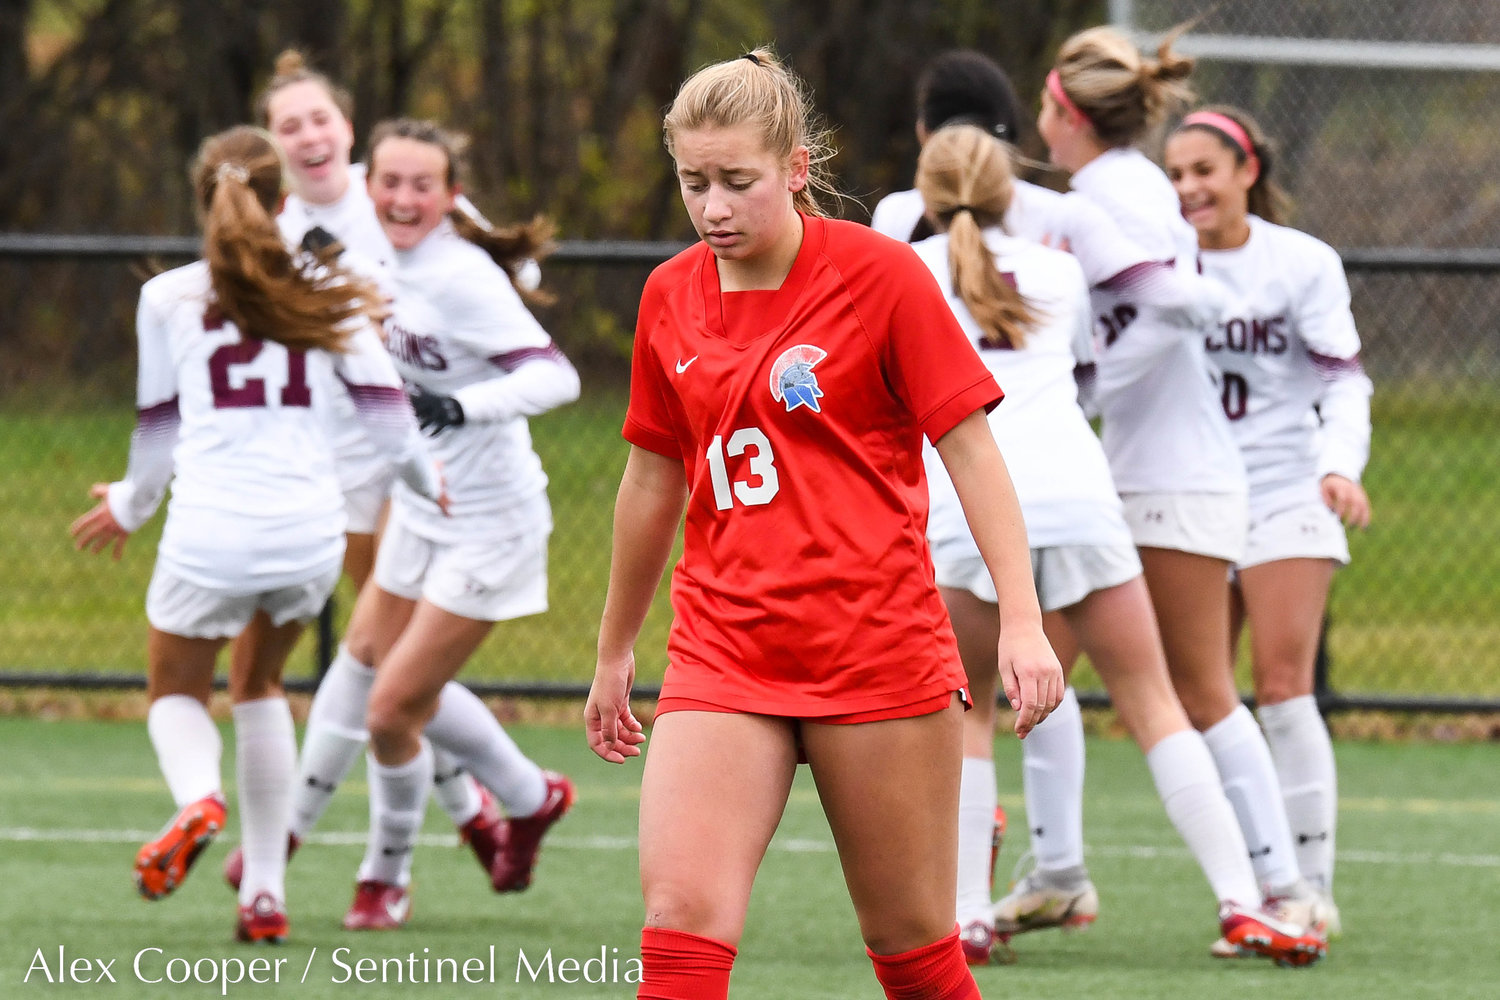 New Hartford player Willa Pratt (13) reacts as Albertus Magnus players celebrate after scoring a goal during the Class A state final on Sunday at Tompkins-Cortland Community College. The Spartans lost 3-1.